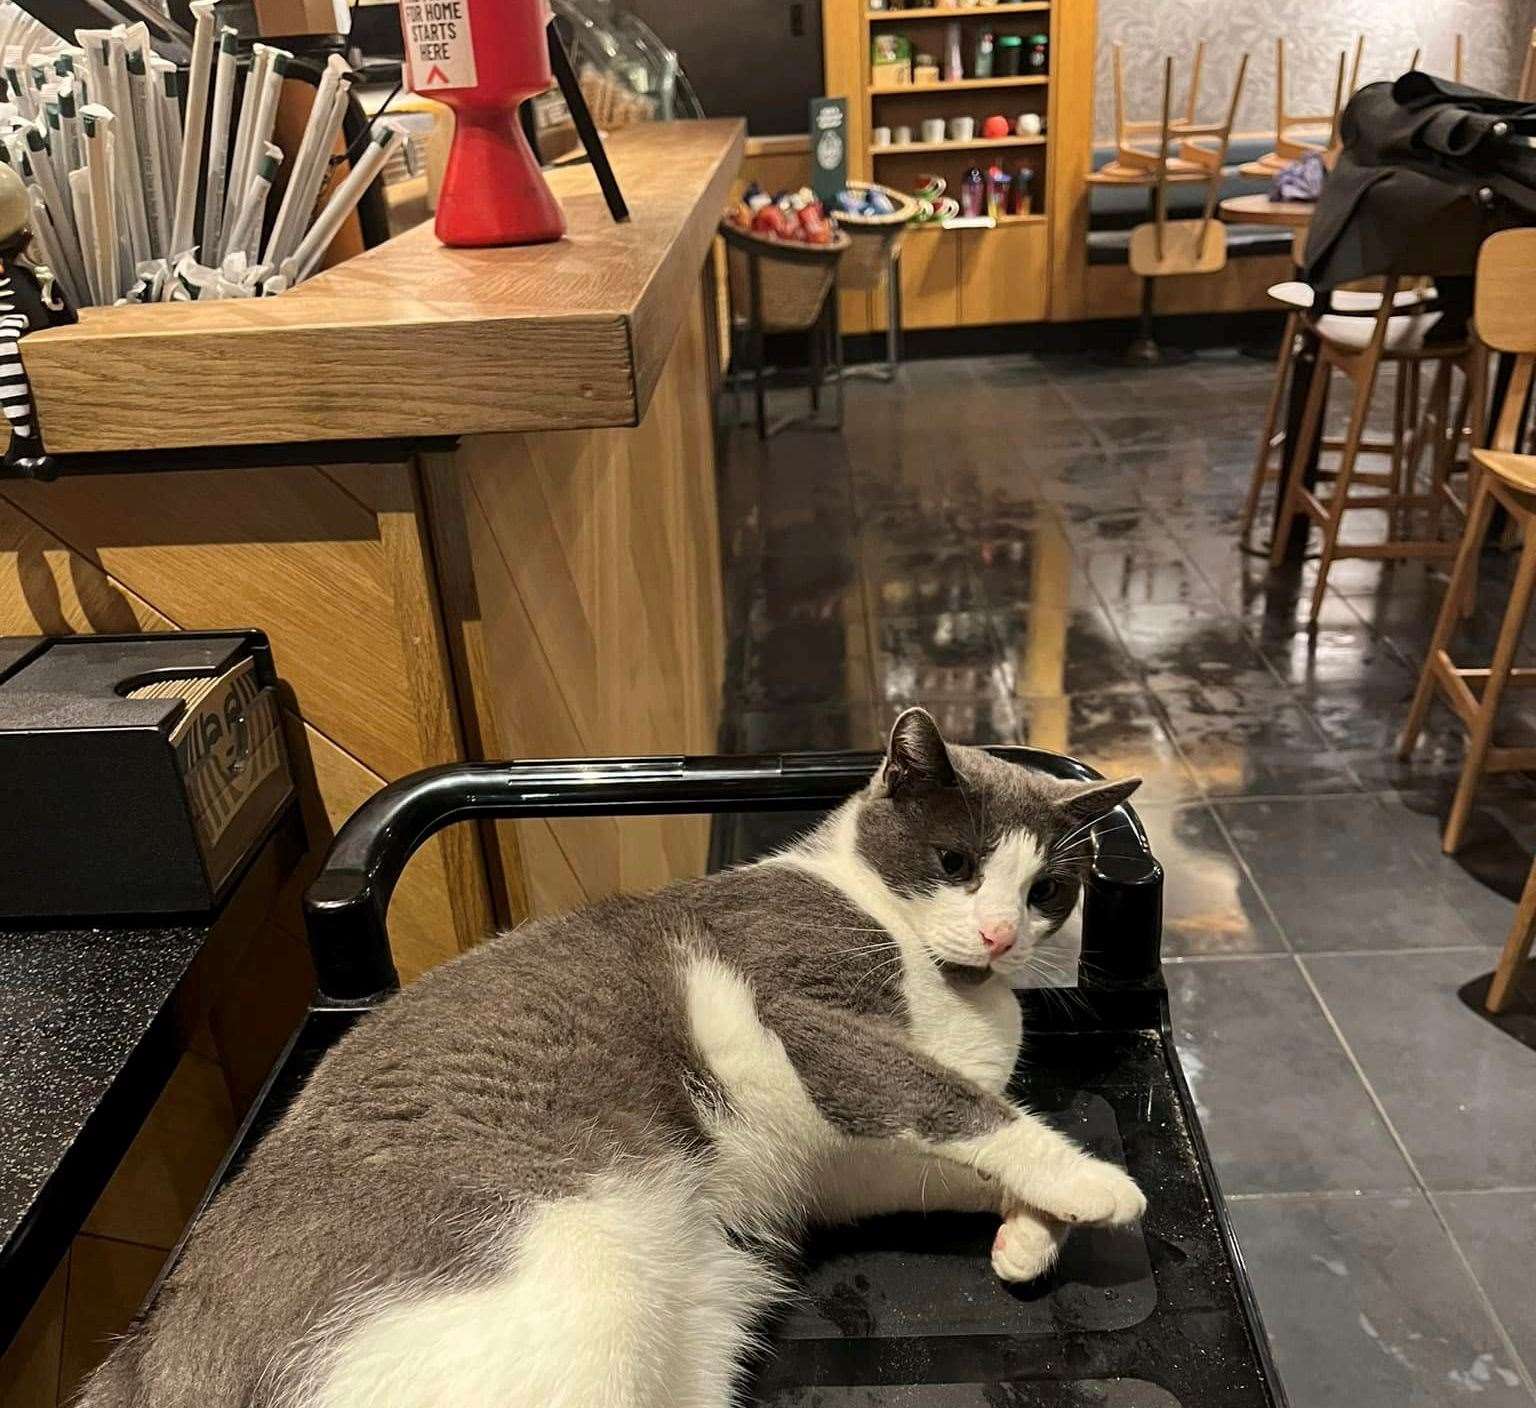 A frequent visitor to Starbucks, Griffin has become well-known and well-liked by the staff there. Picture: Bethany Page